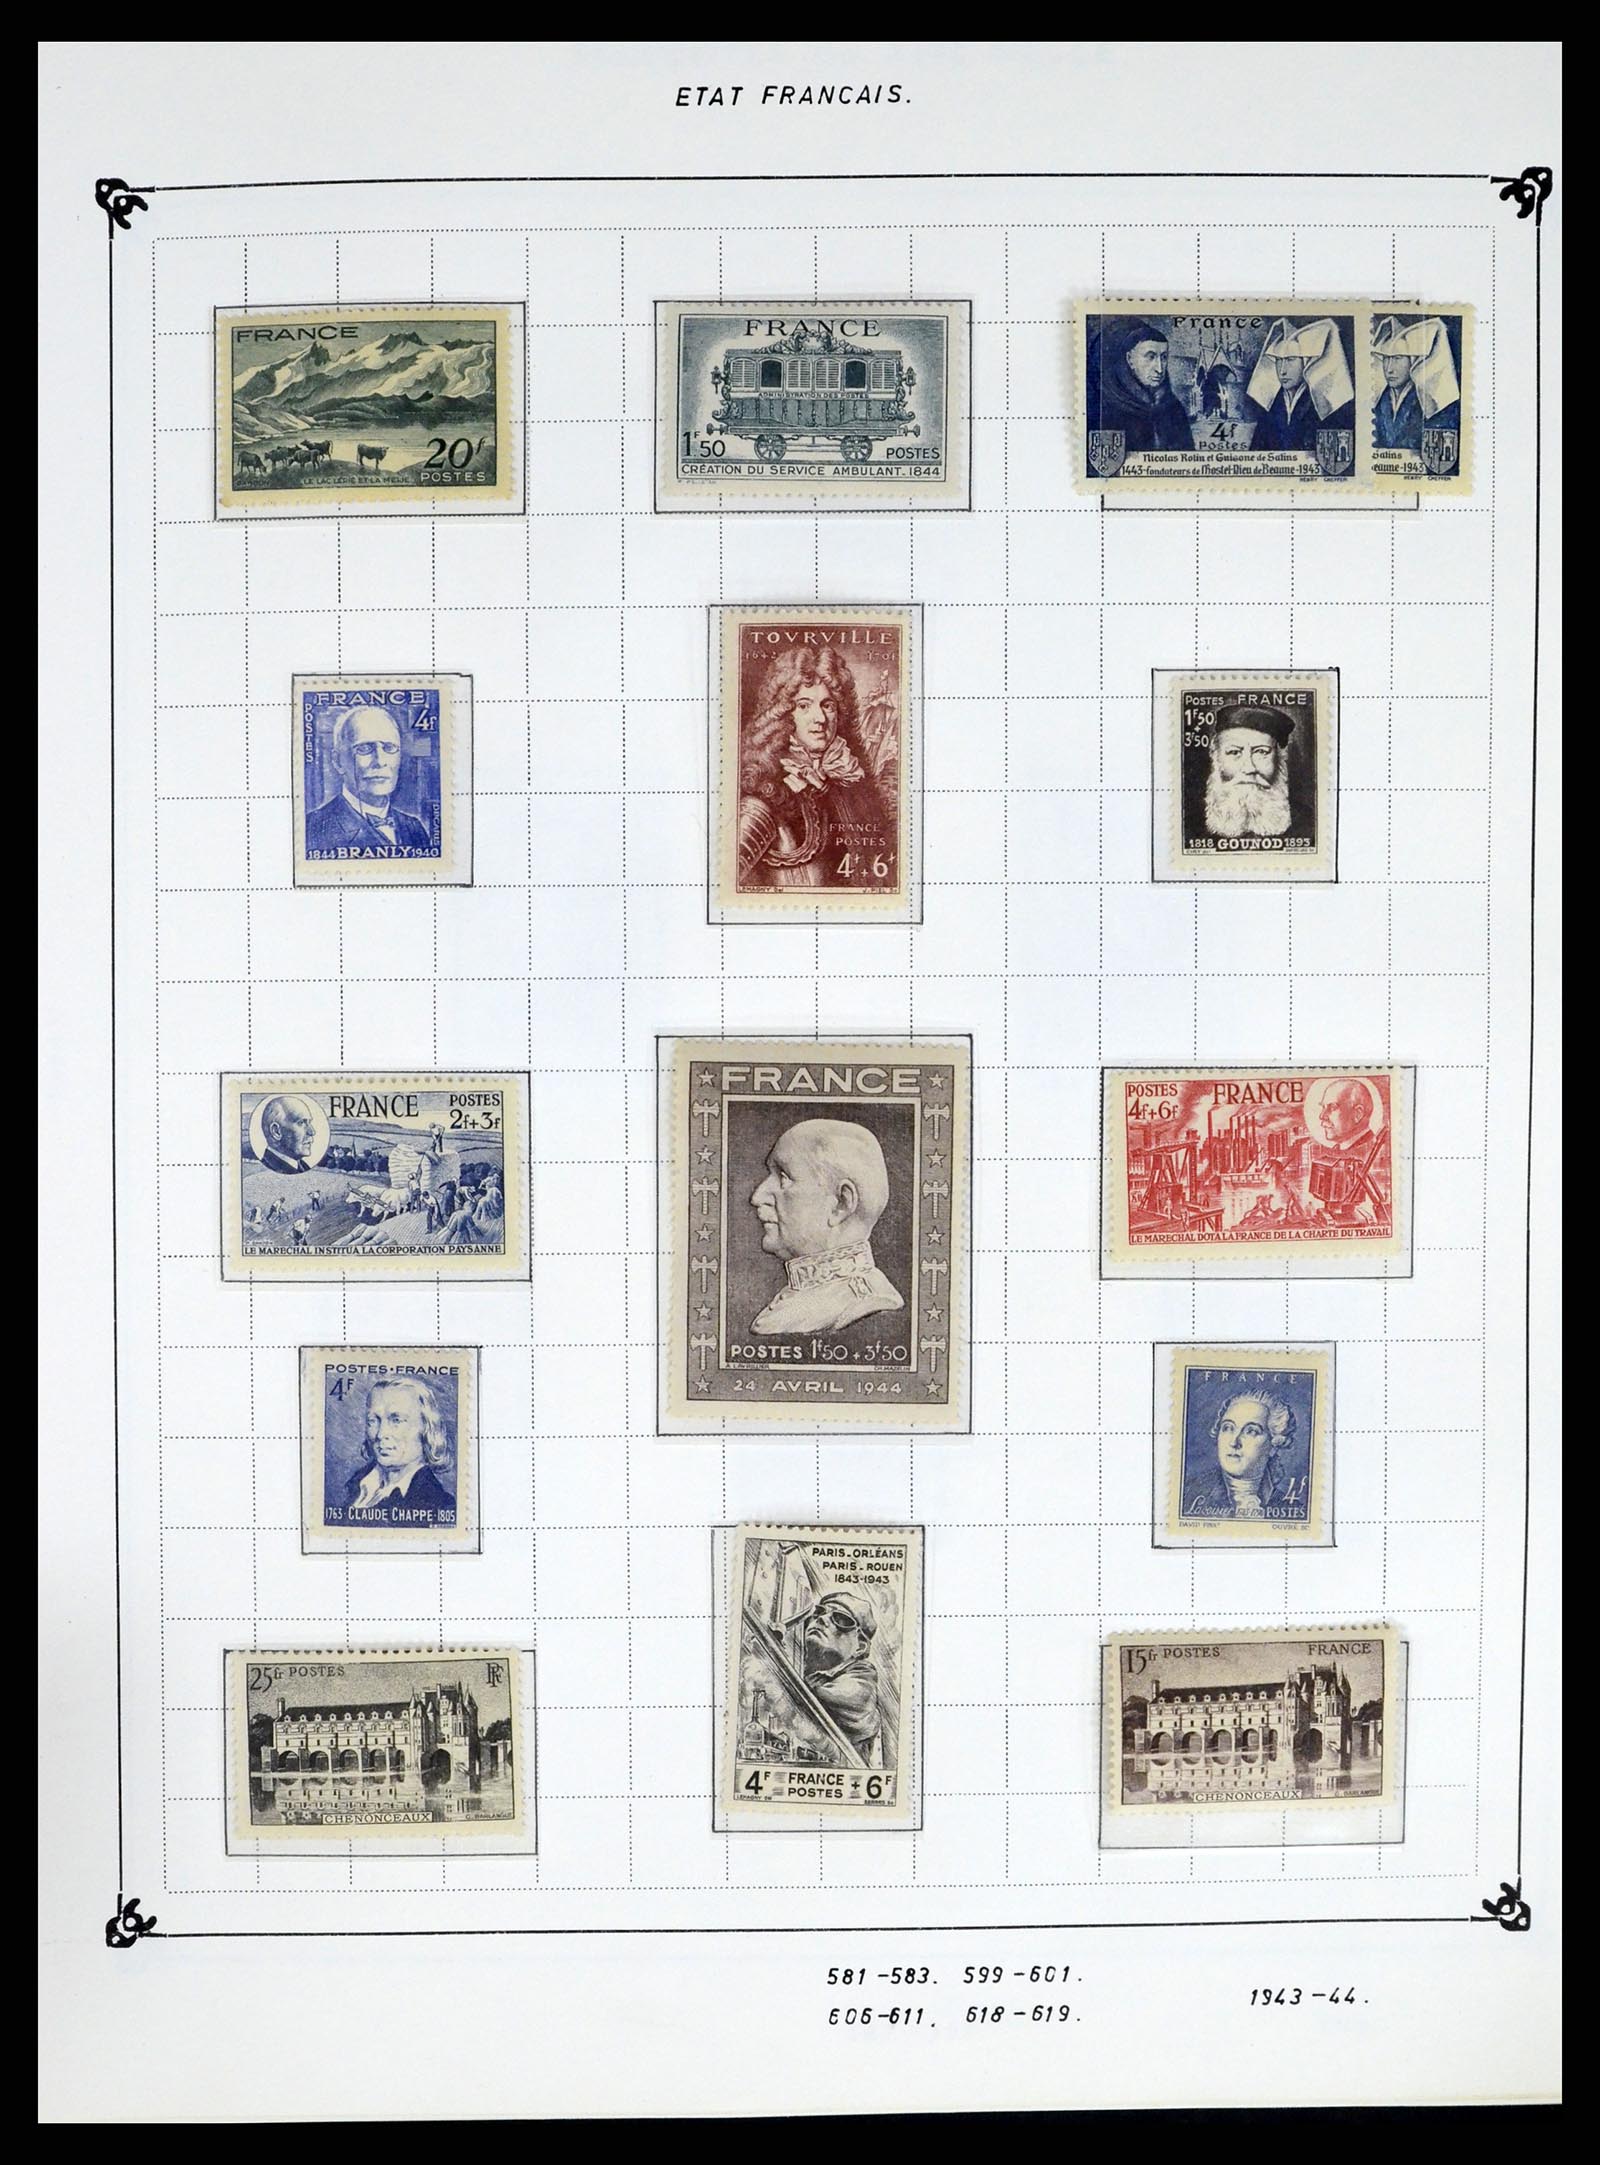 37287 037 - Stamp collection 37287 France 1849-1998.